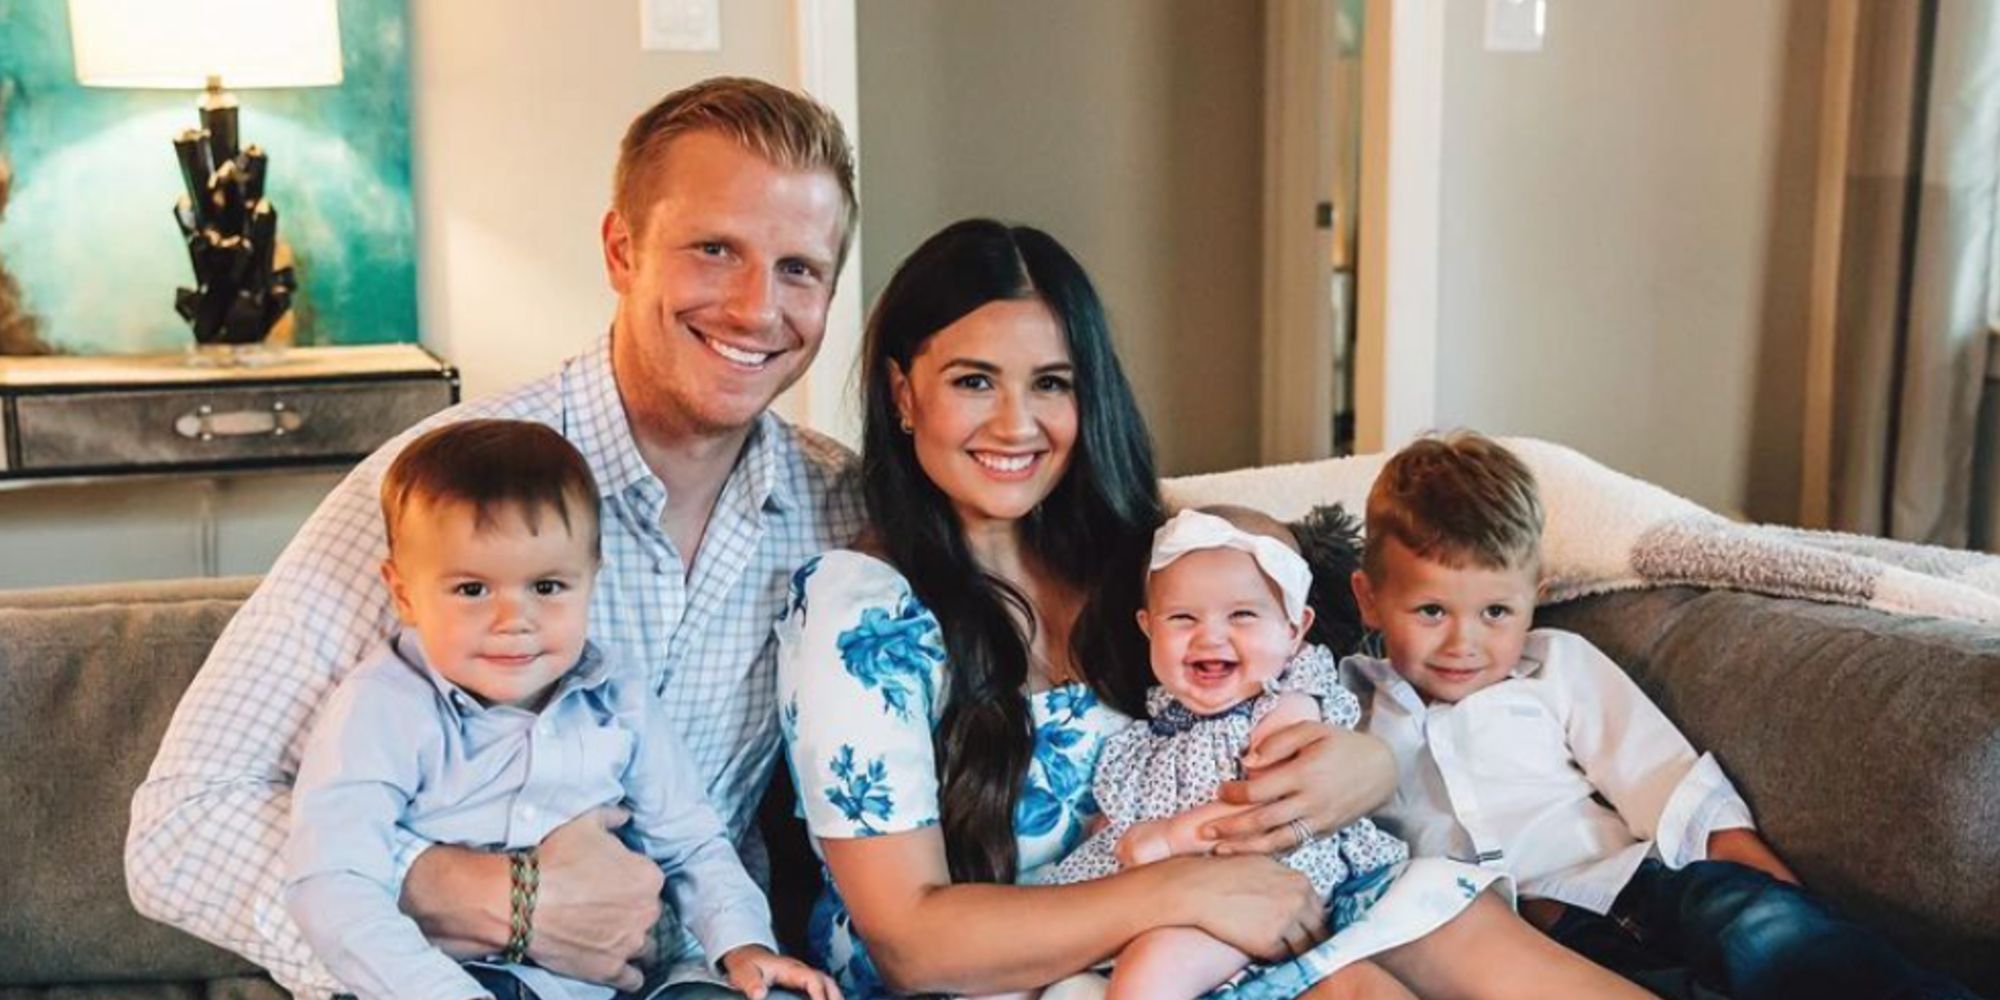 The Bachelor's Sean Lowe And Catherine Giudici with their children posing for a photo